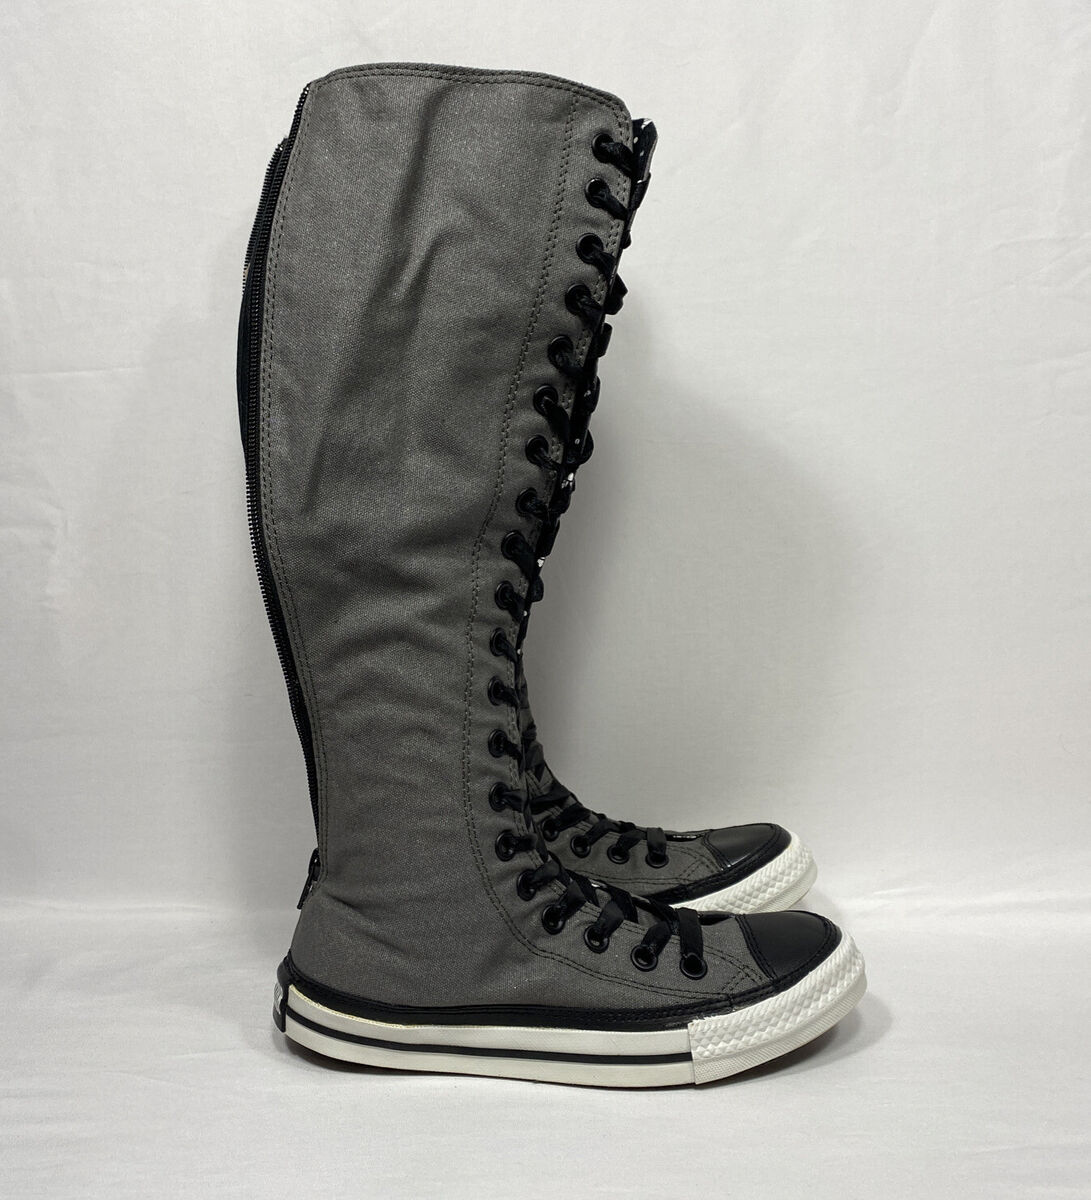 Converse Chuck Taylor XXHi Lace Up Sneakers Boots 6 | eBay